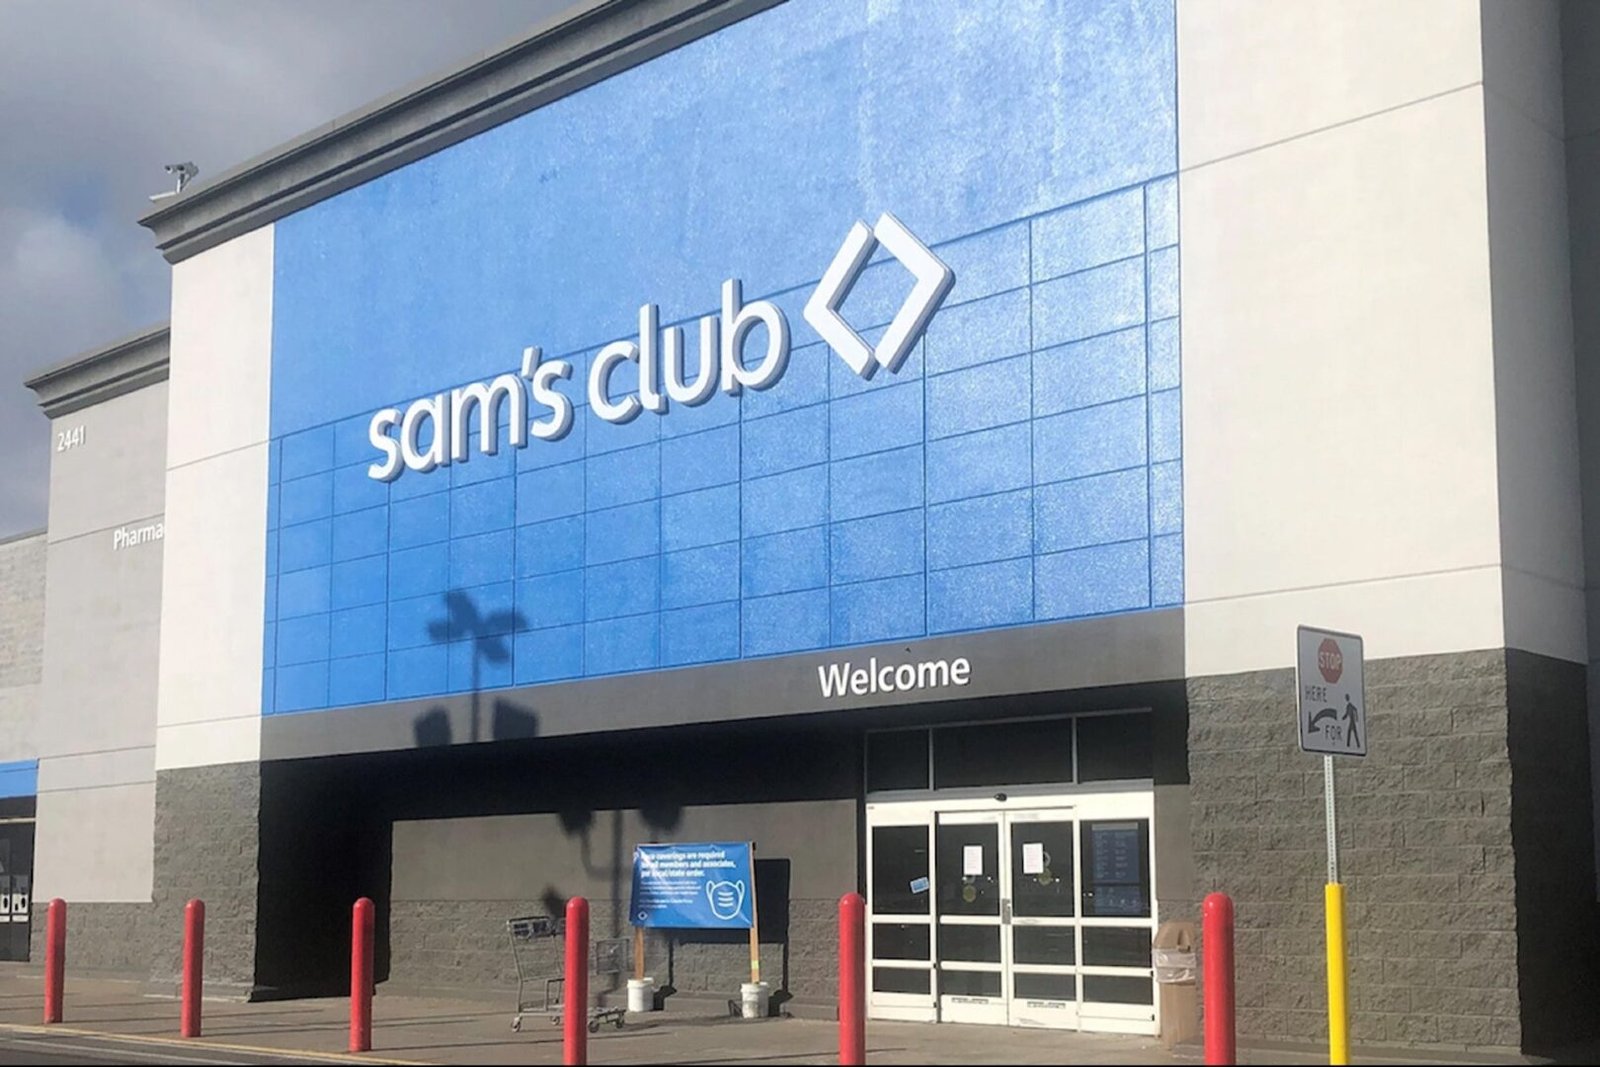 Get 36% off a Sam’s Club Plus Membership for Your Business